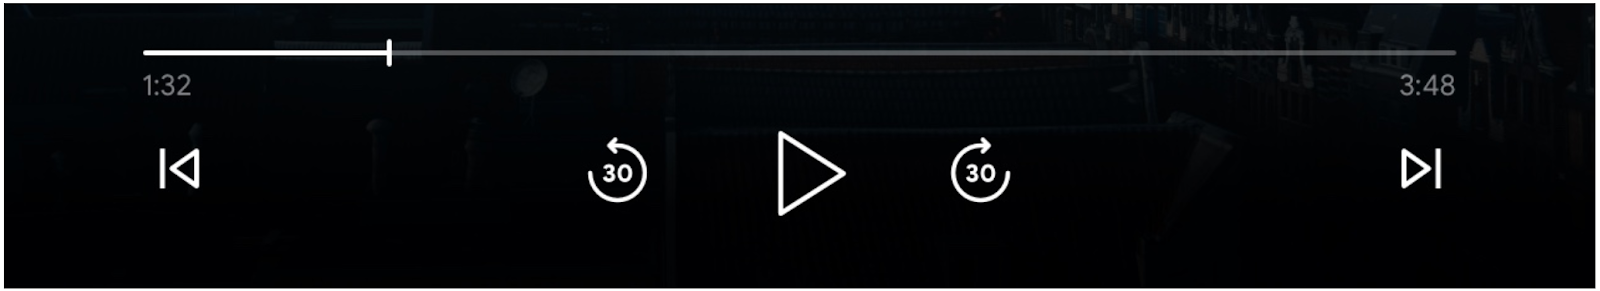 Image of media player controls: progress bar, 'Play' button, 'Skip forward' and 'Skip backward' buttons, and 'Queue previous' and 'Queue next' buttons enabled